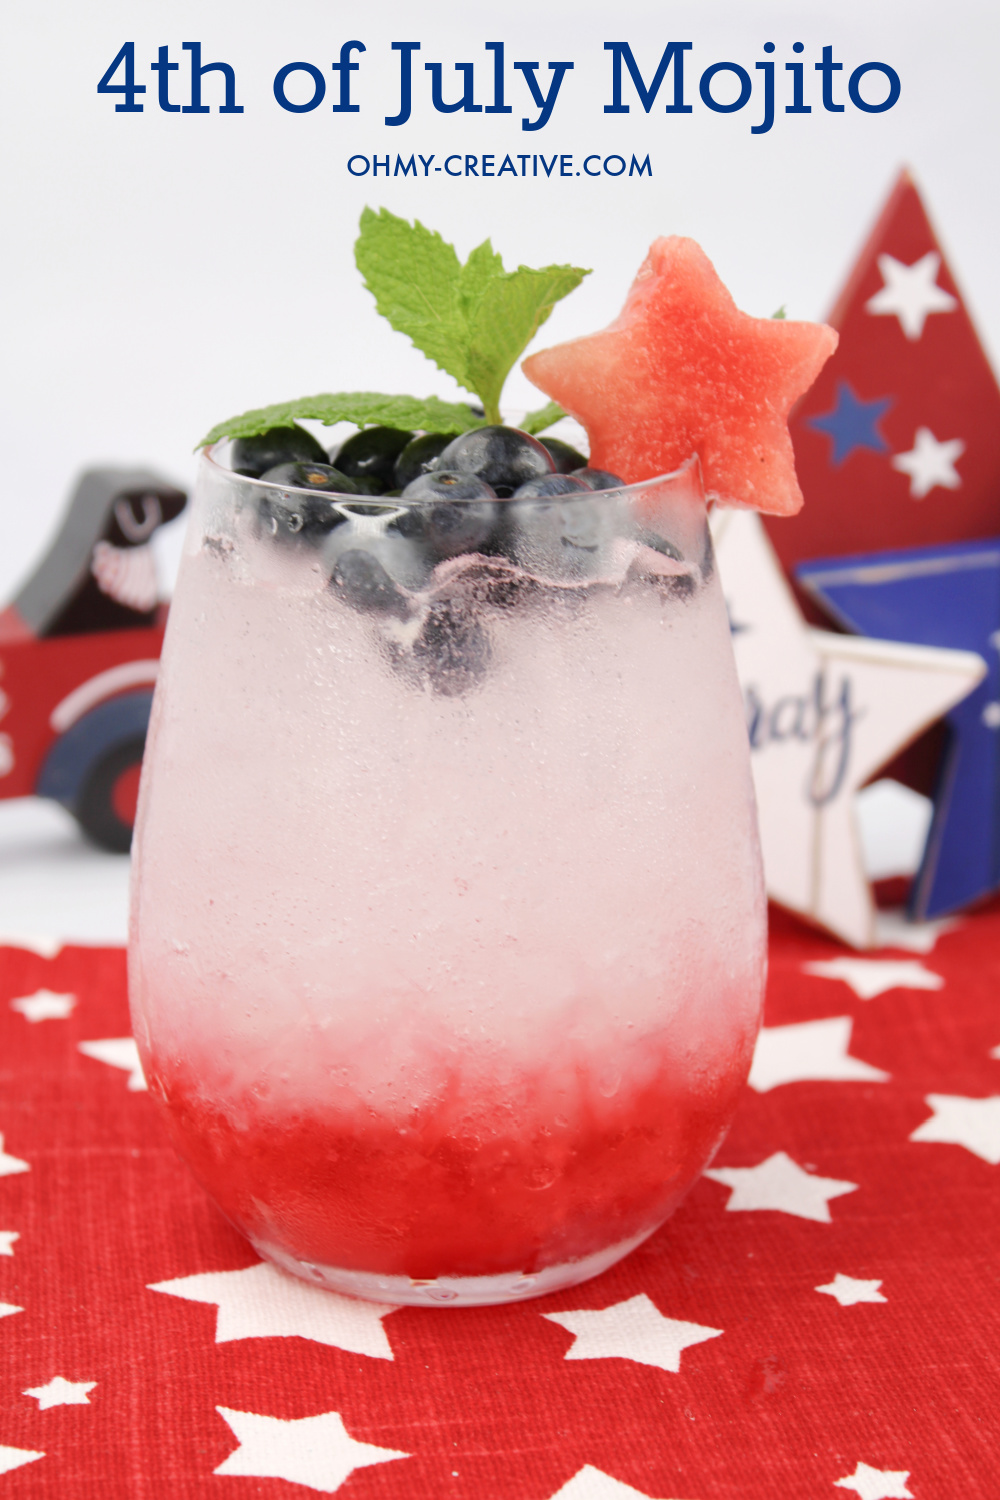 4th Of July Mojito – The Perfect Patriotic Drink